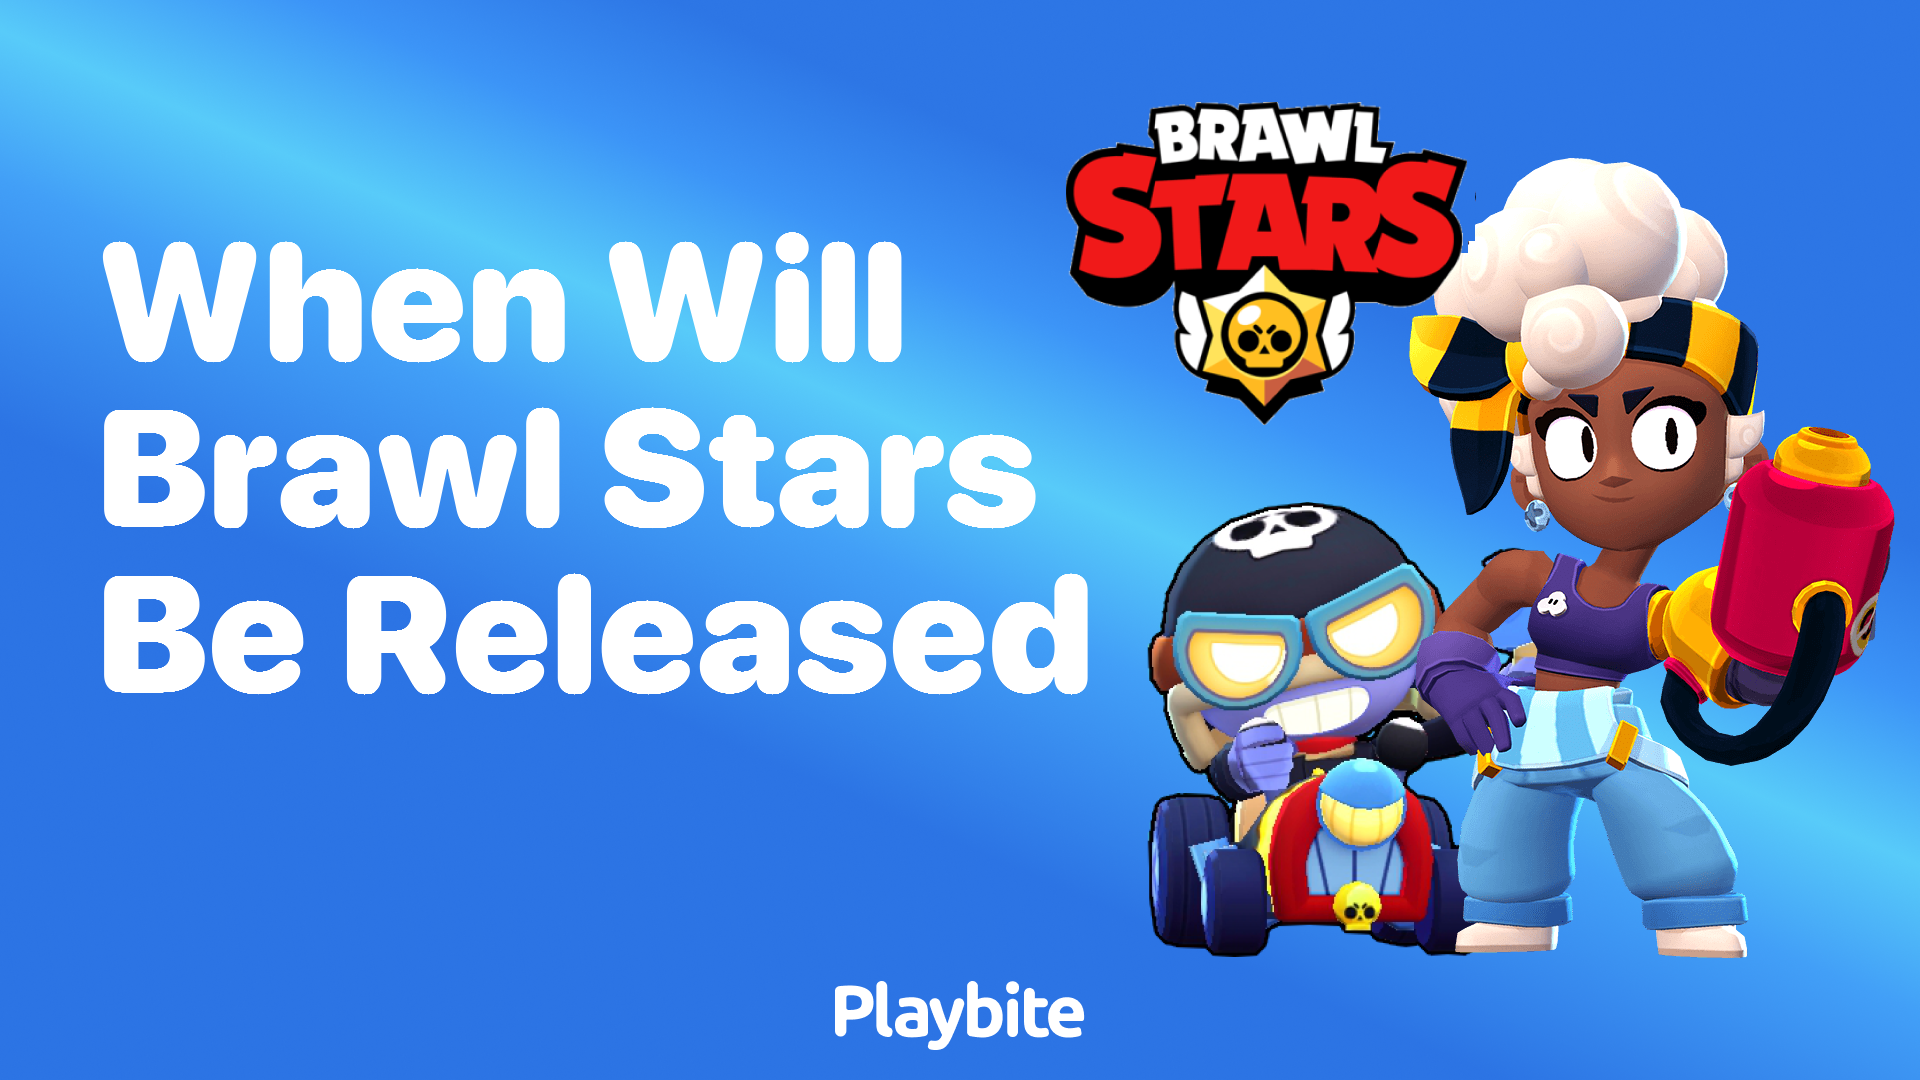 When Will Brawl Stars Be Released?